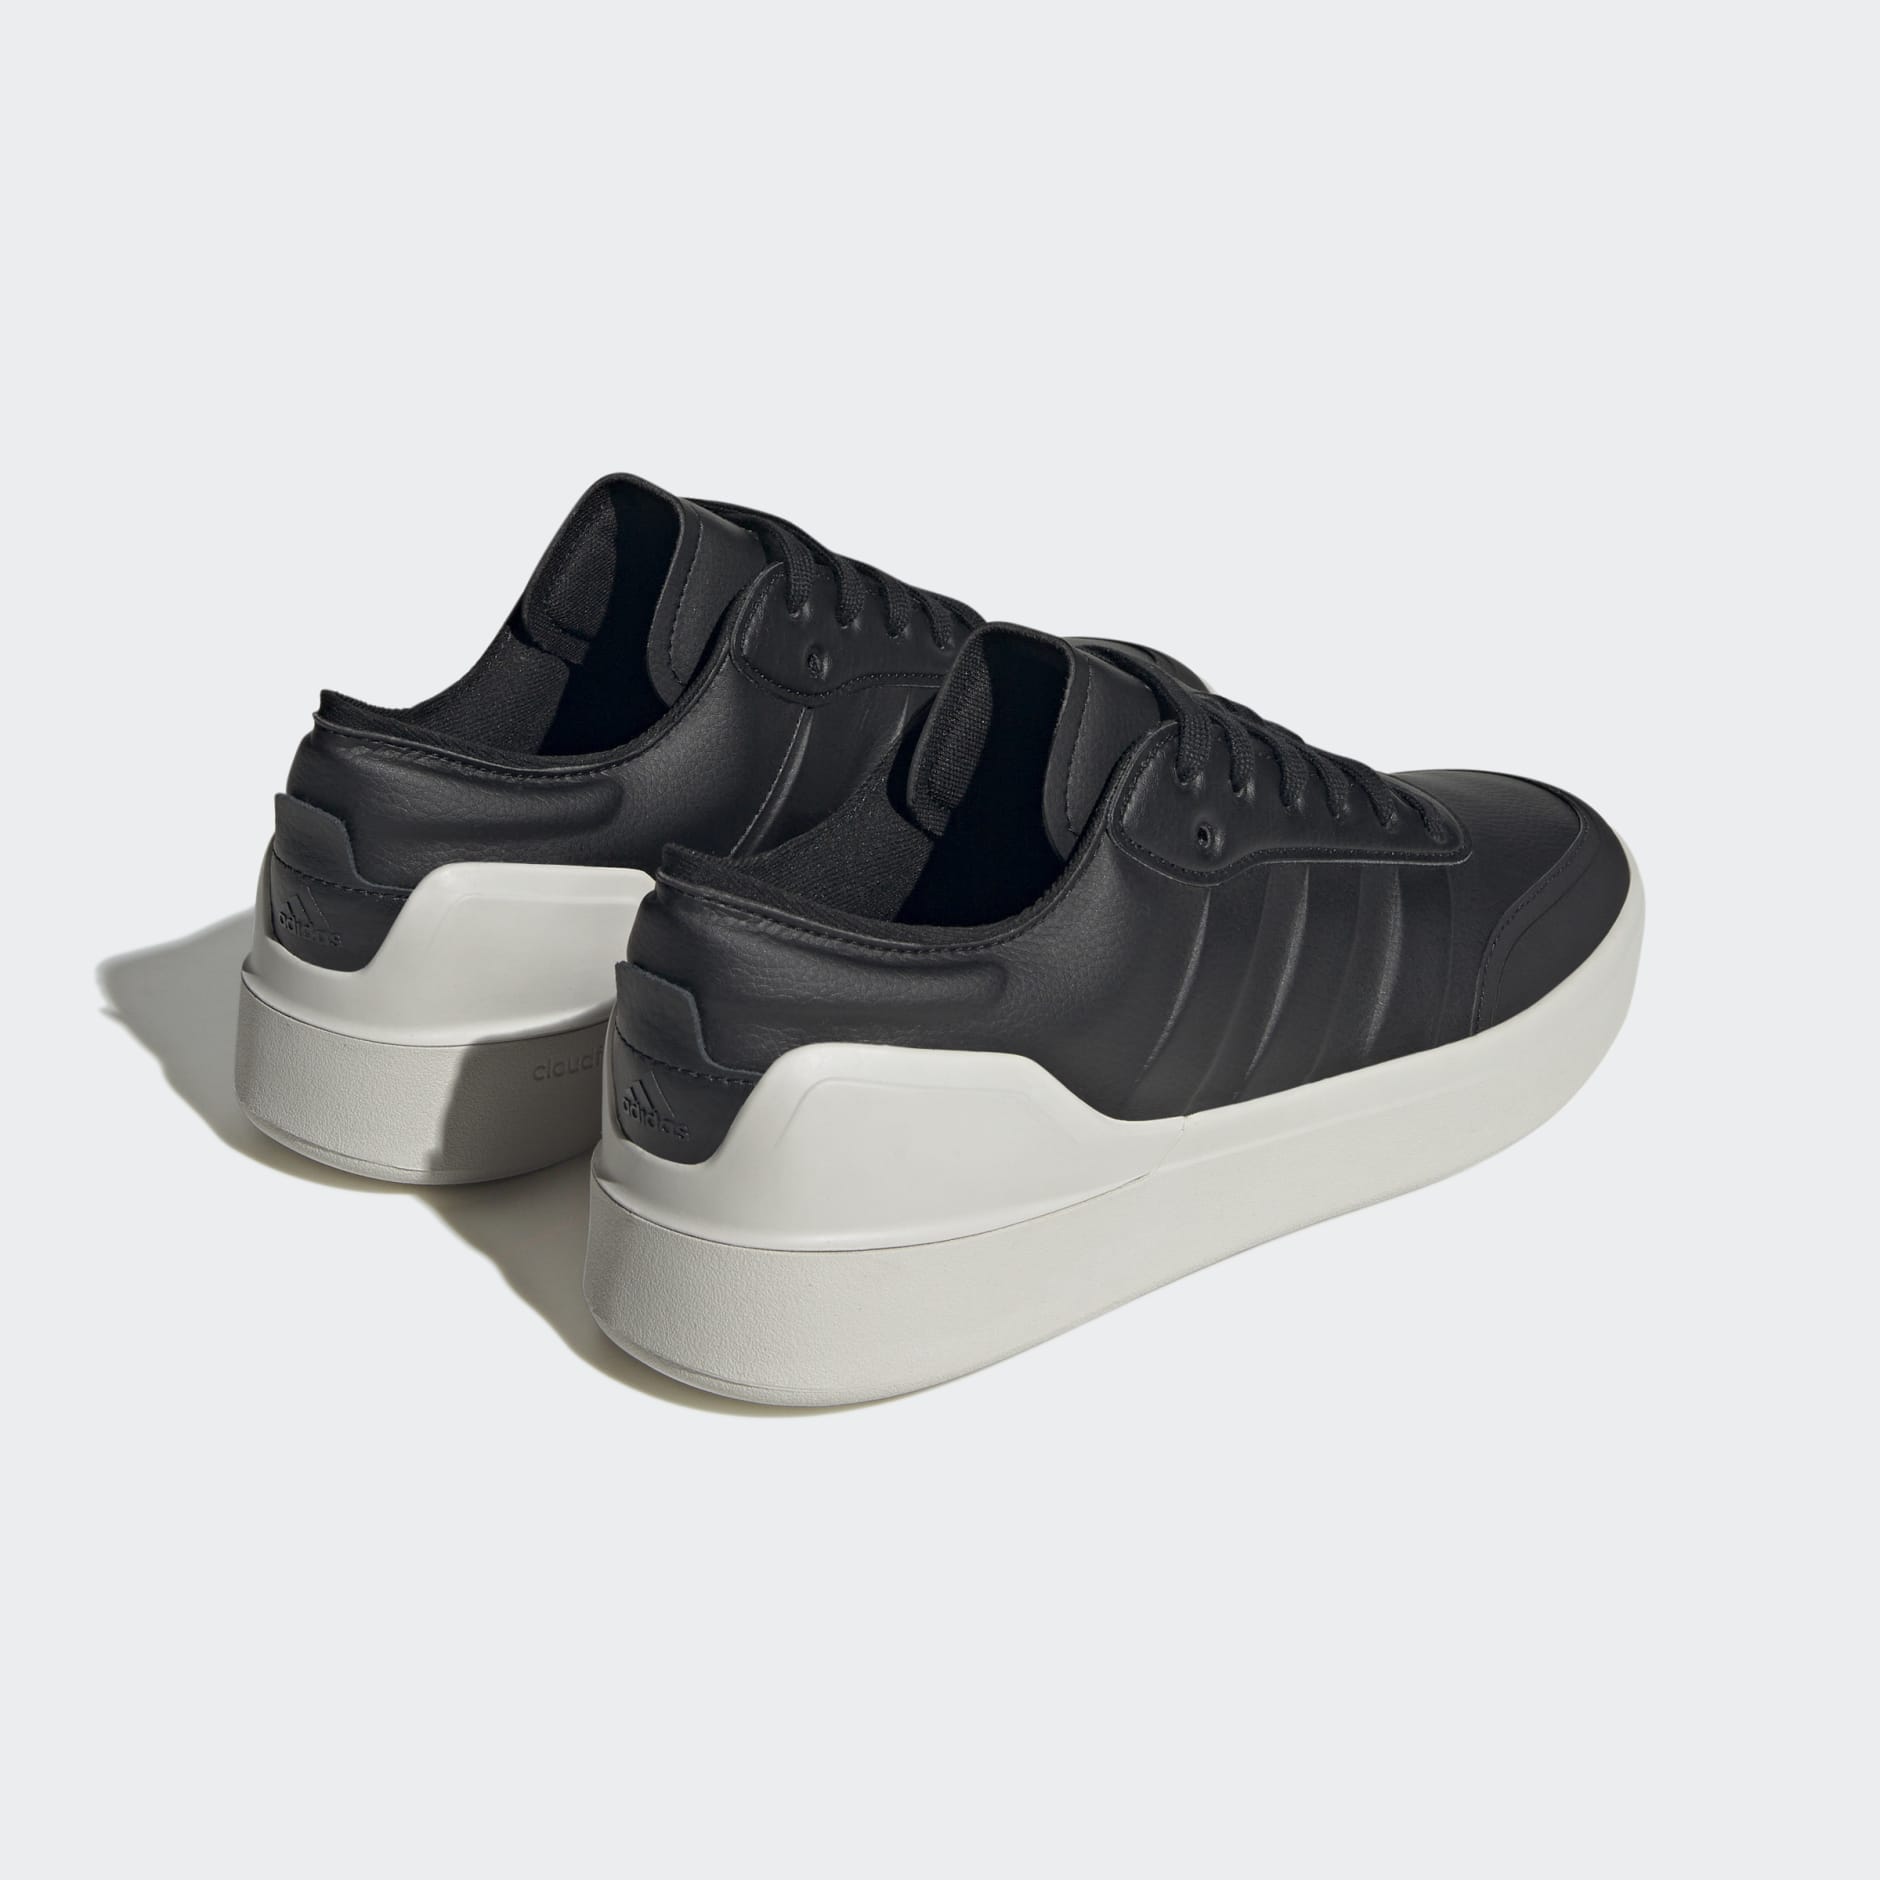 Shoes - Court Revival Shoes - Black | adidas South Africa